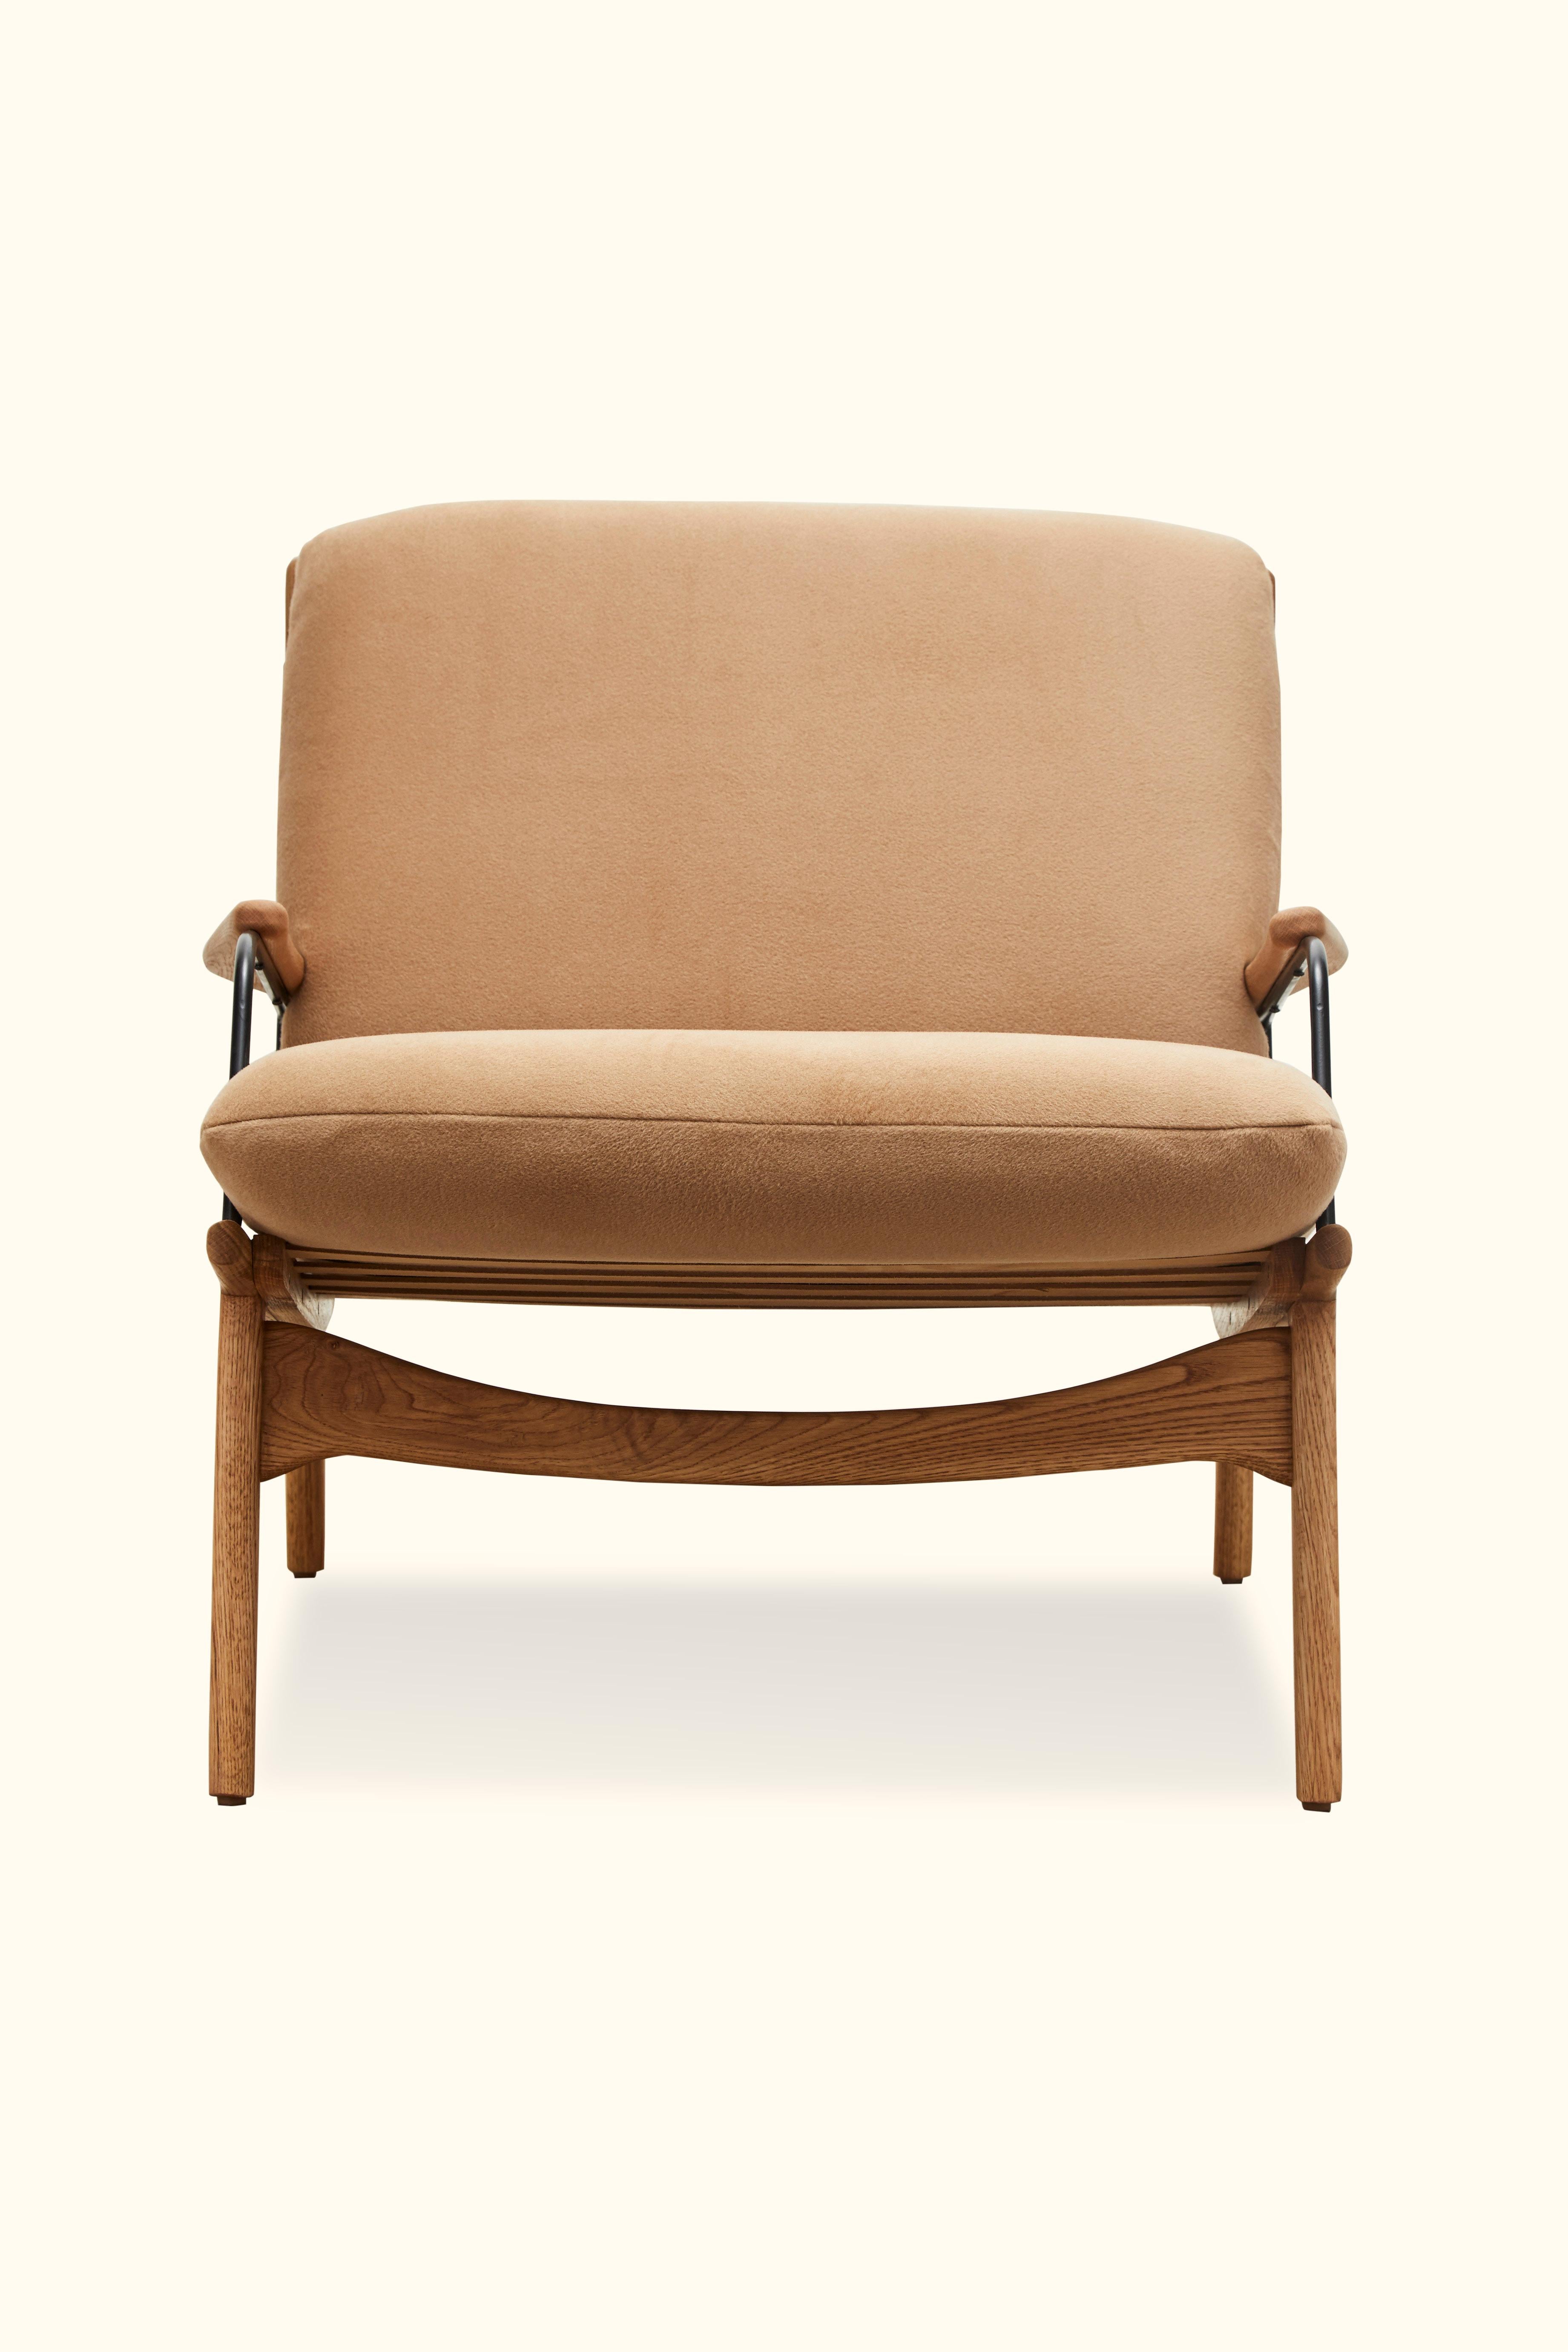 The Maker’s armchair is a solid walnut or oak frame chair with a leather sling that features brass details on the seat and back. Loose seat and back cushions are included.

Available to order in customer's own materials.